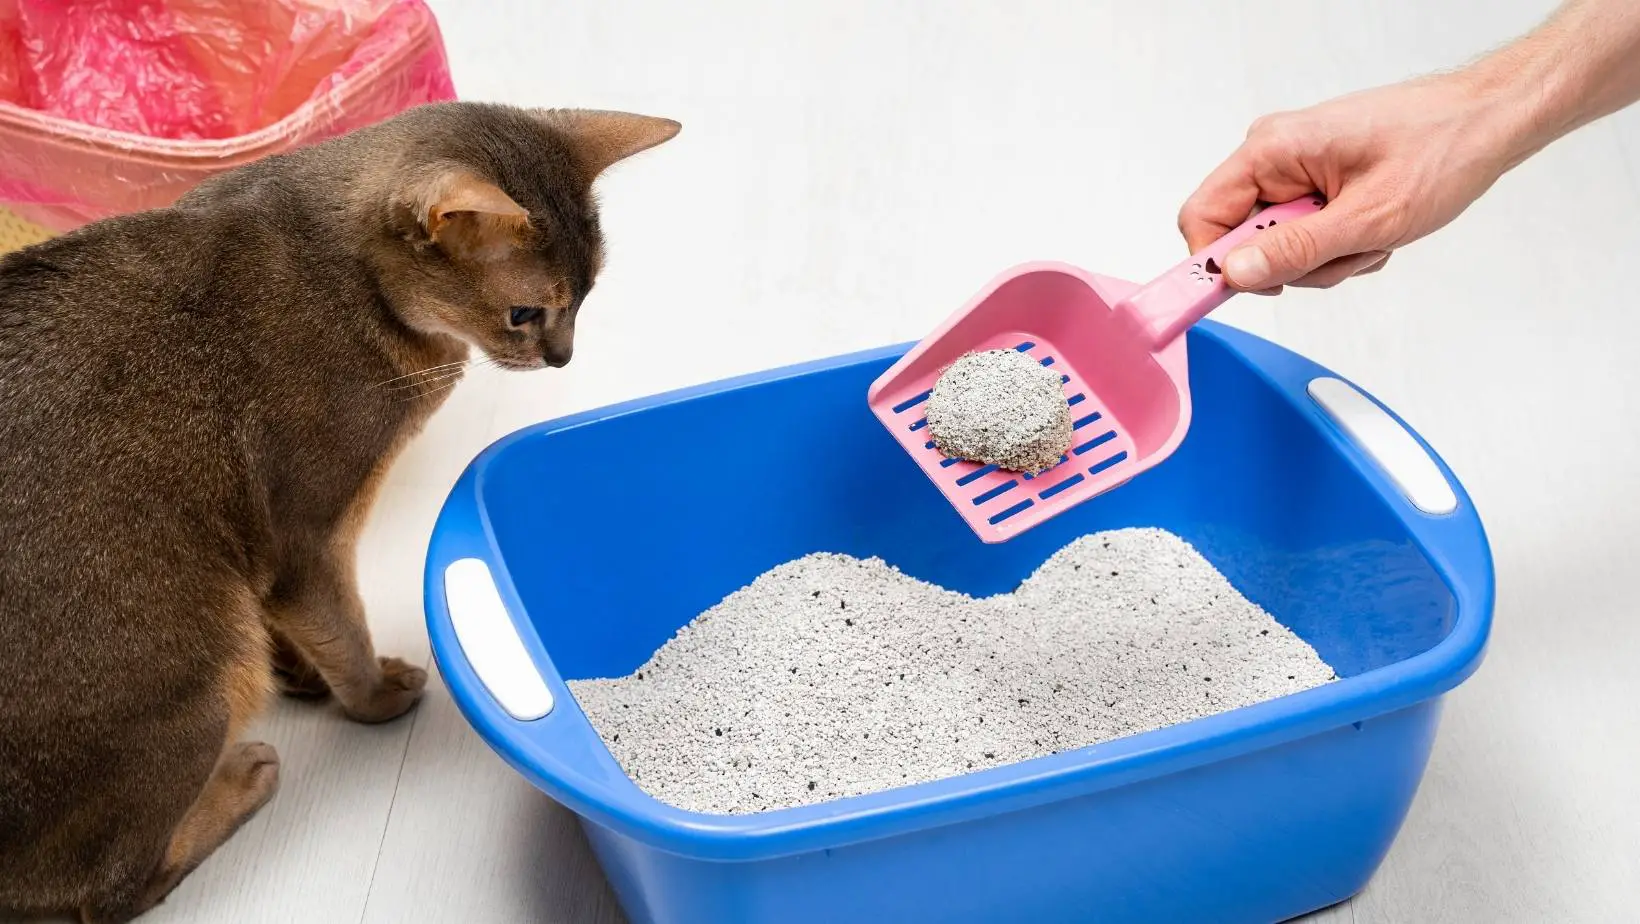 How to Keep Cats From Pooping in Mulch?